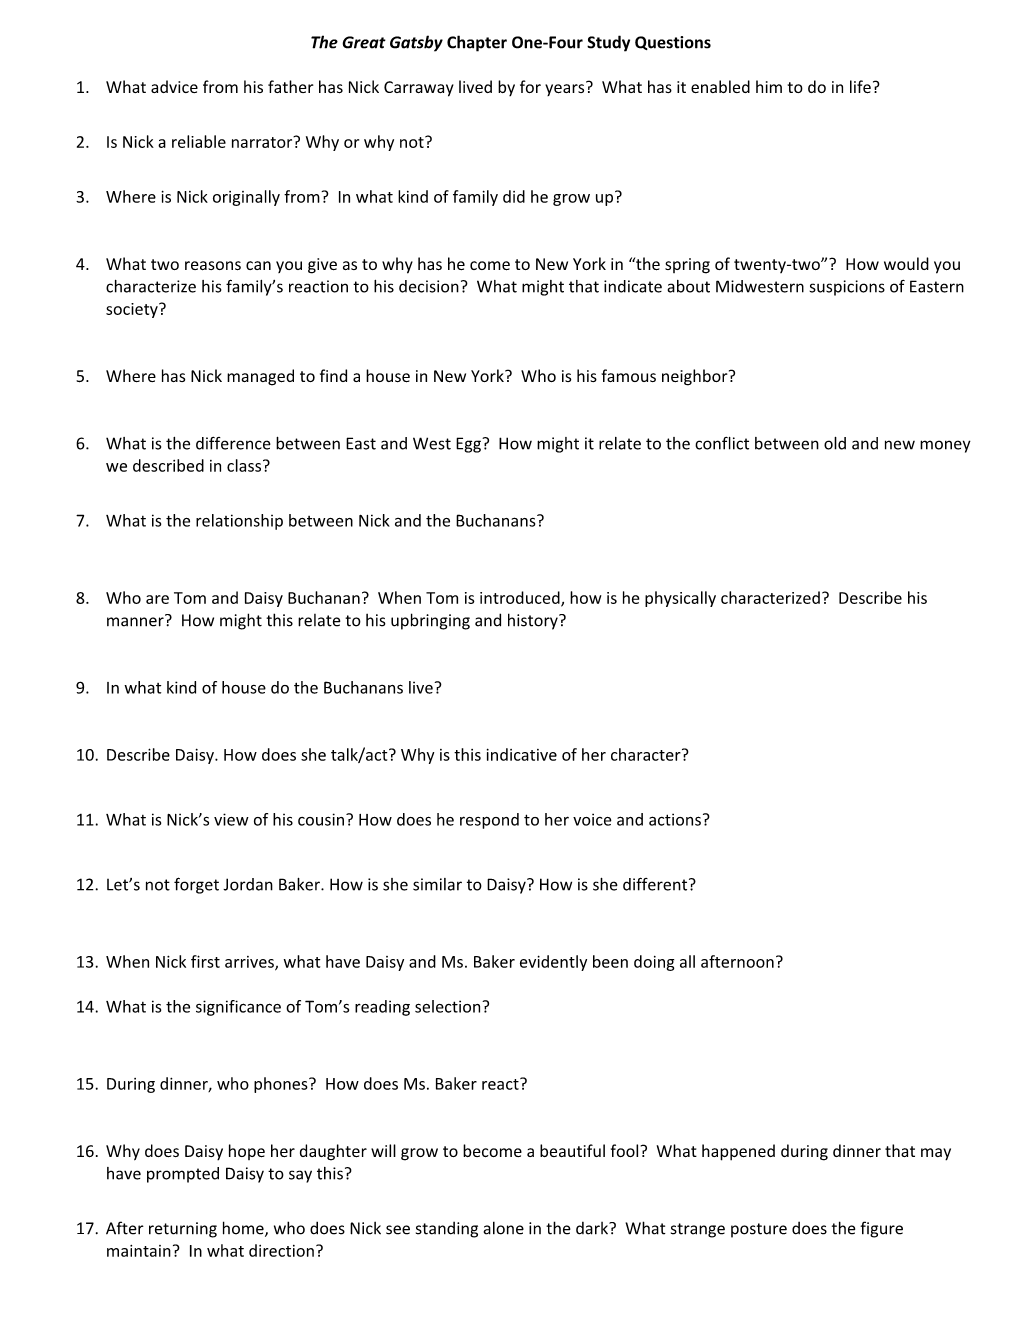 The Great Gatsby Chapter One-Three Study Questions